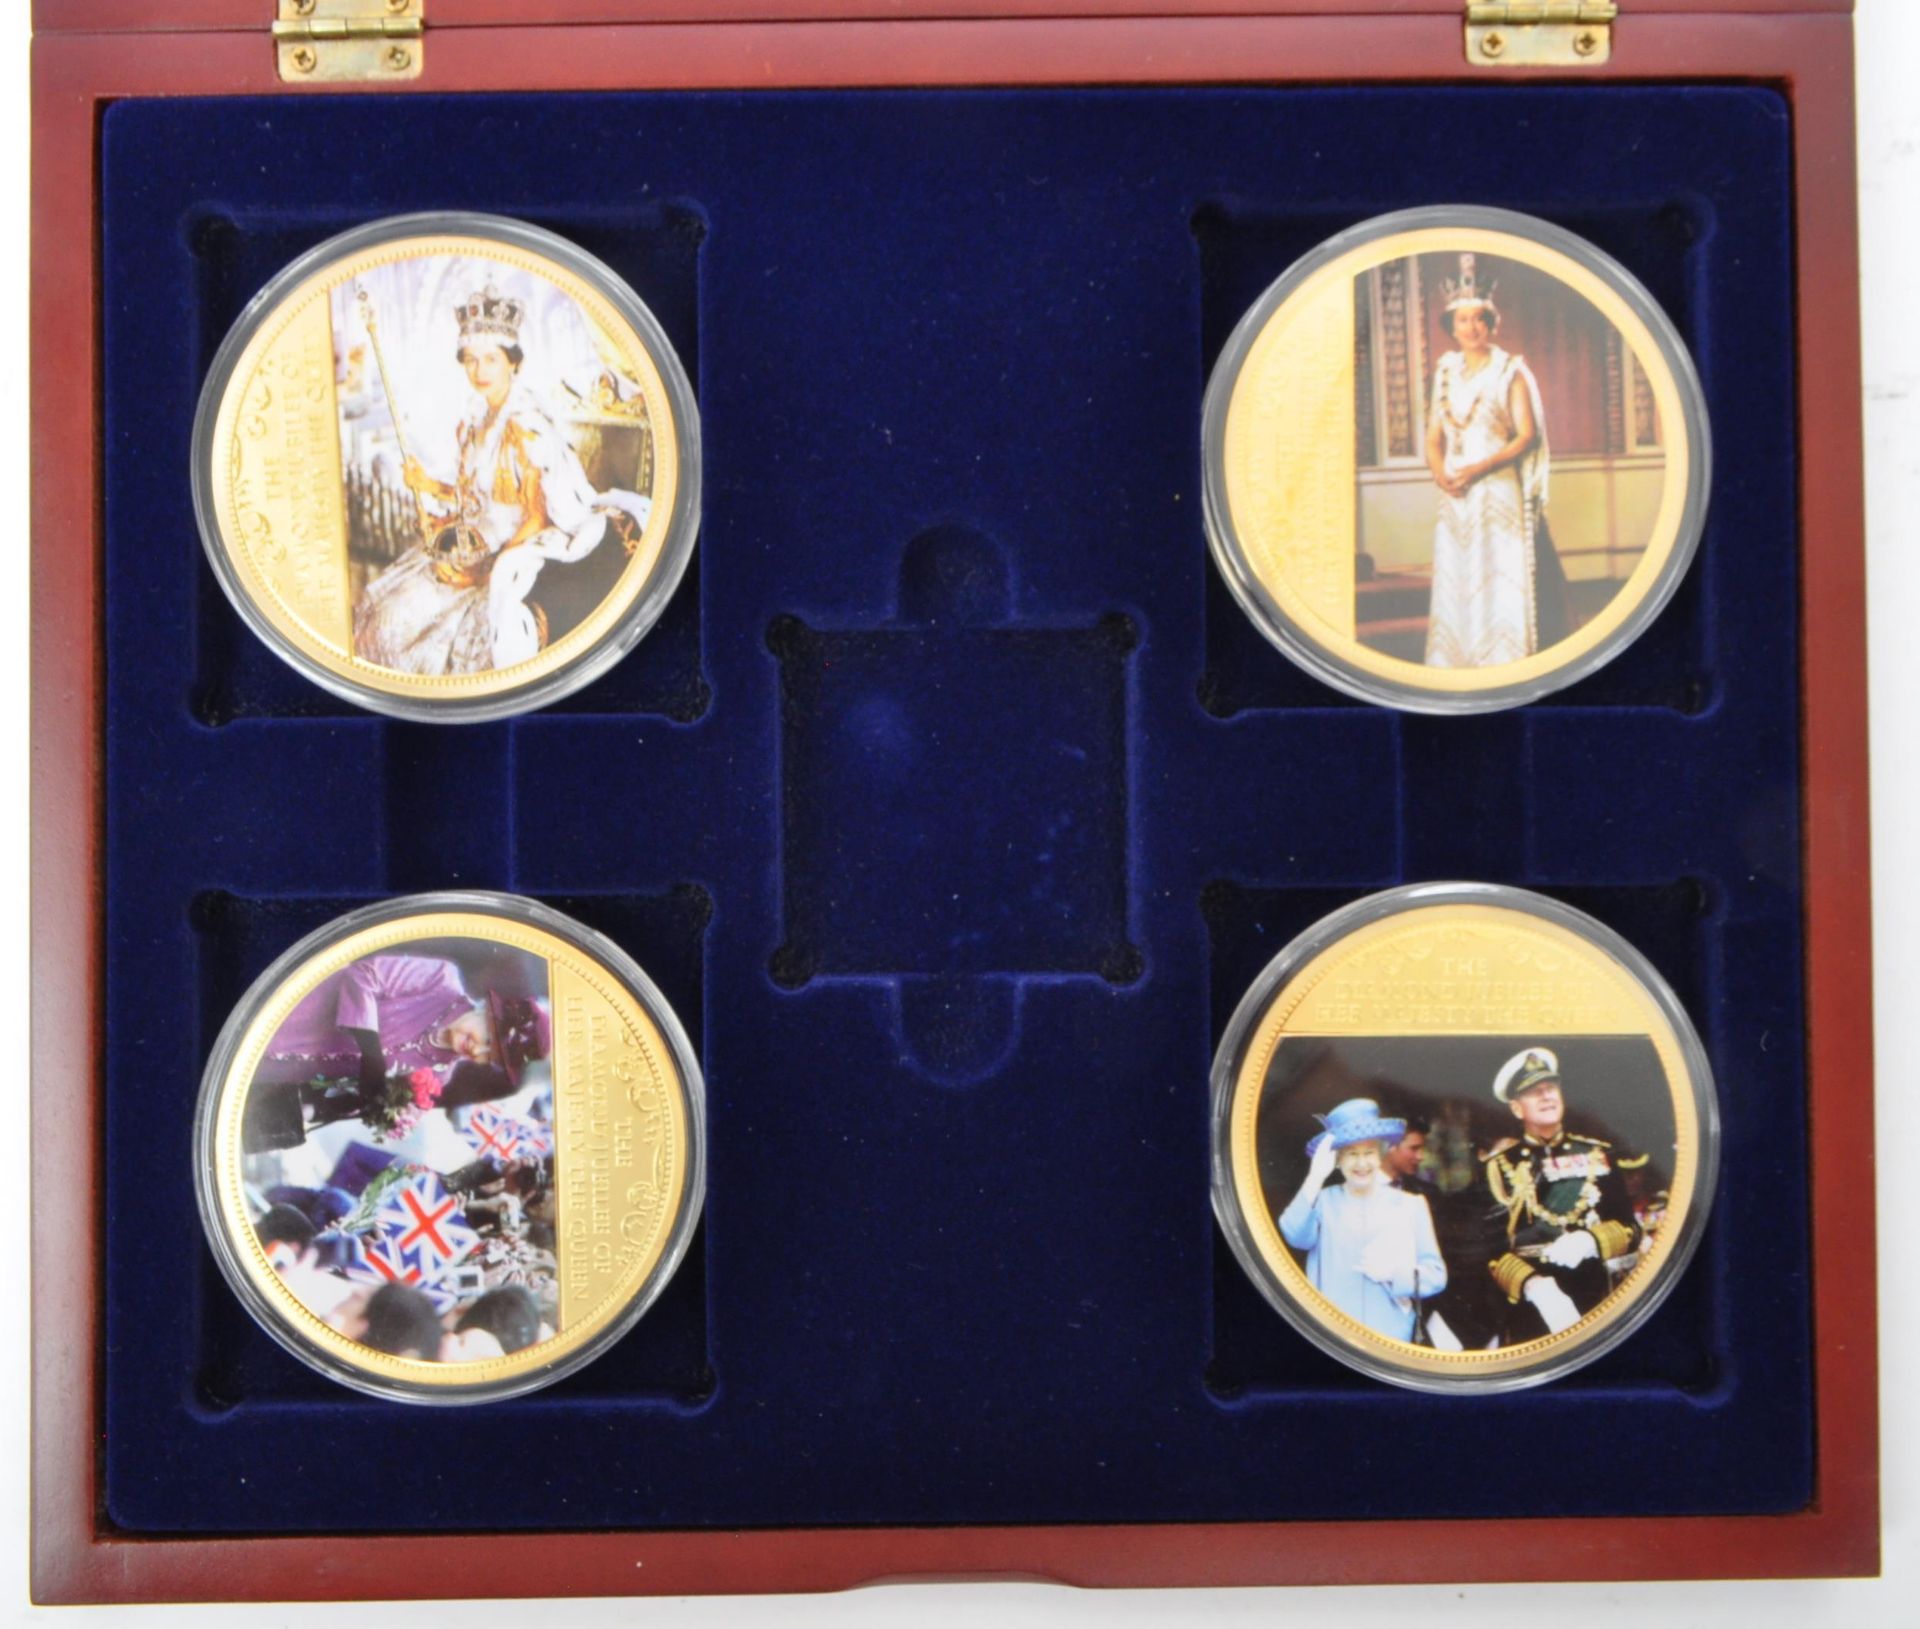 THE QUEEN DIAMOND JUBILEE GIFT PACK OF COMMEMORATIVE COINS